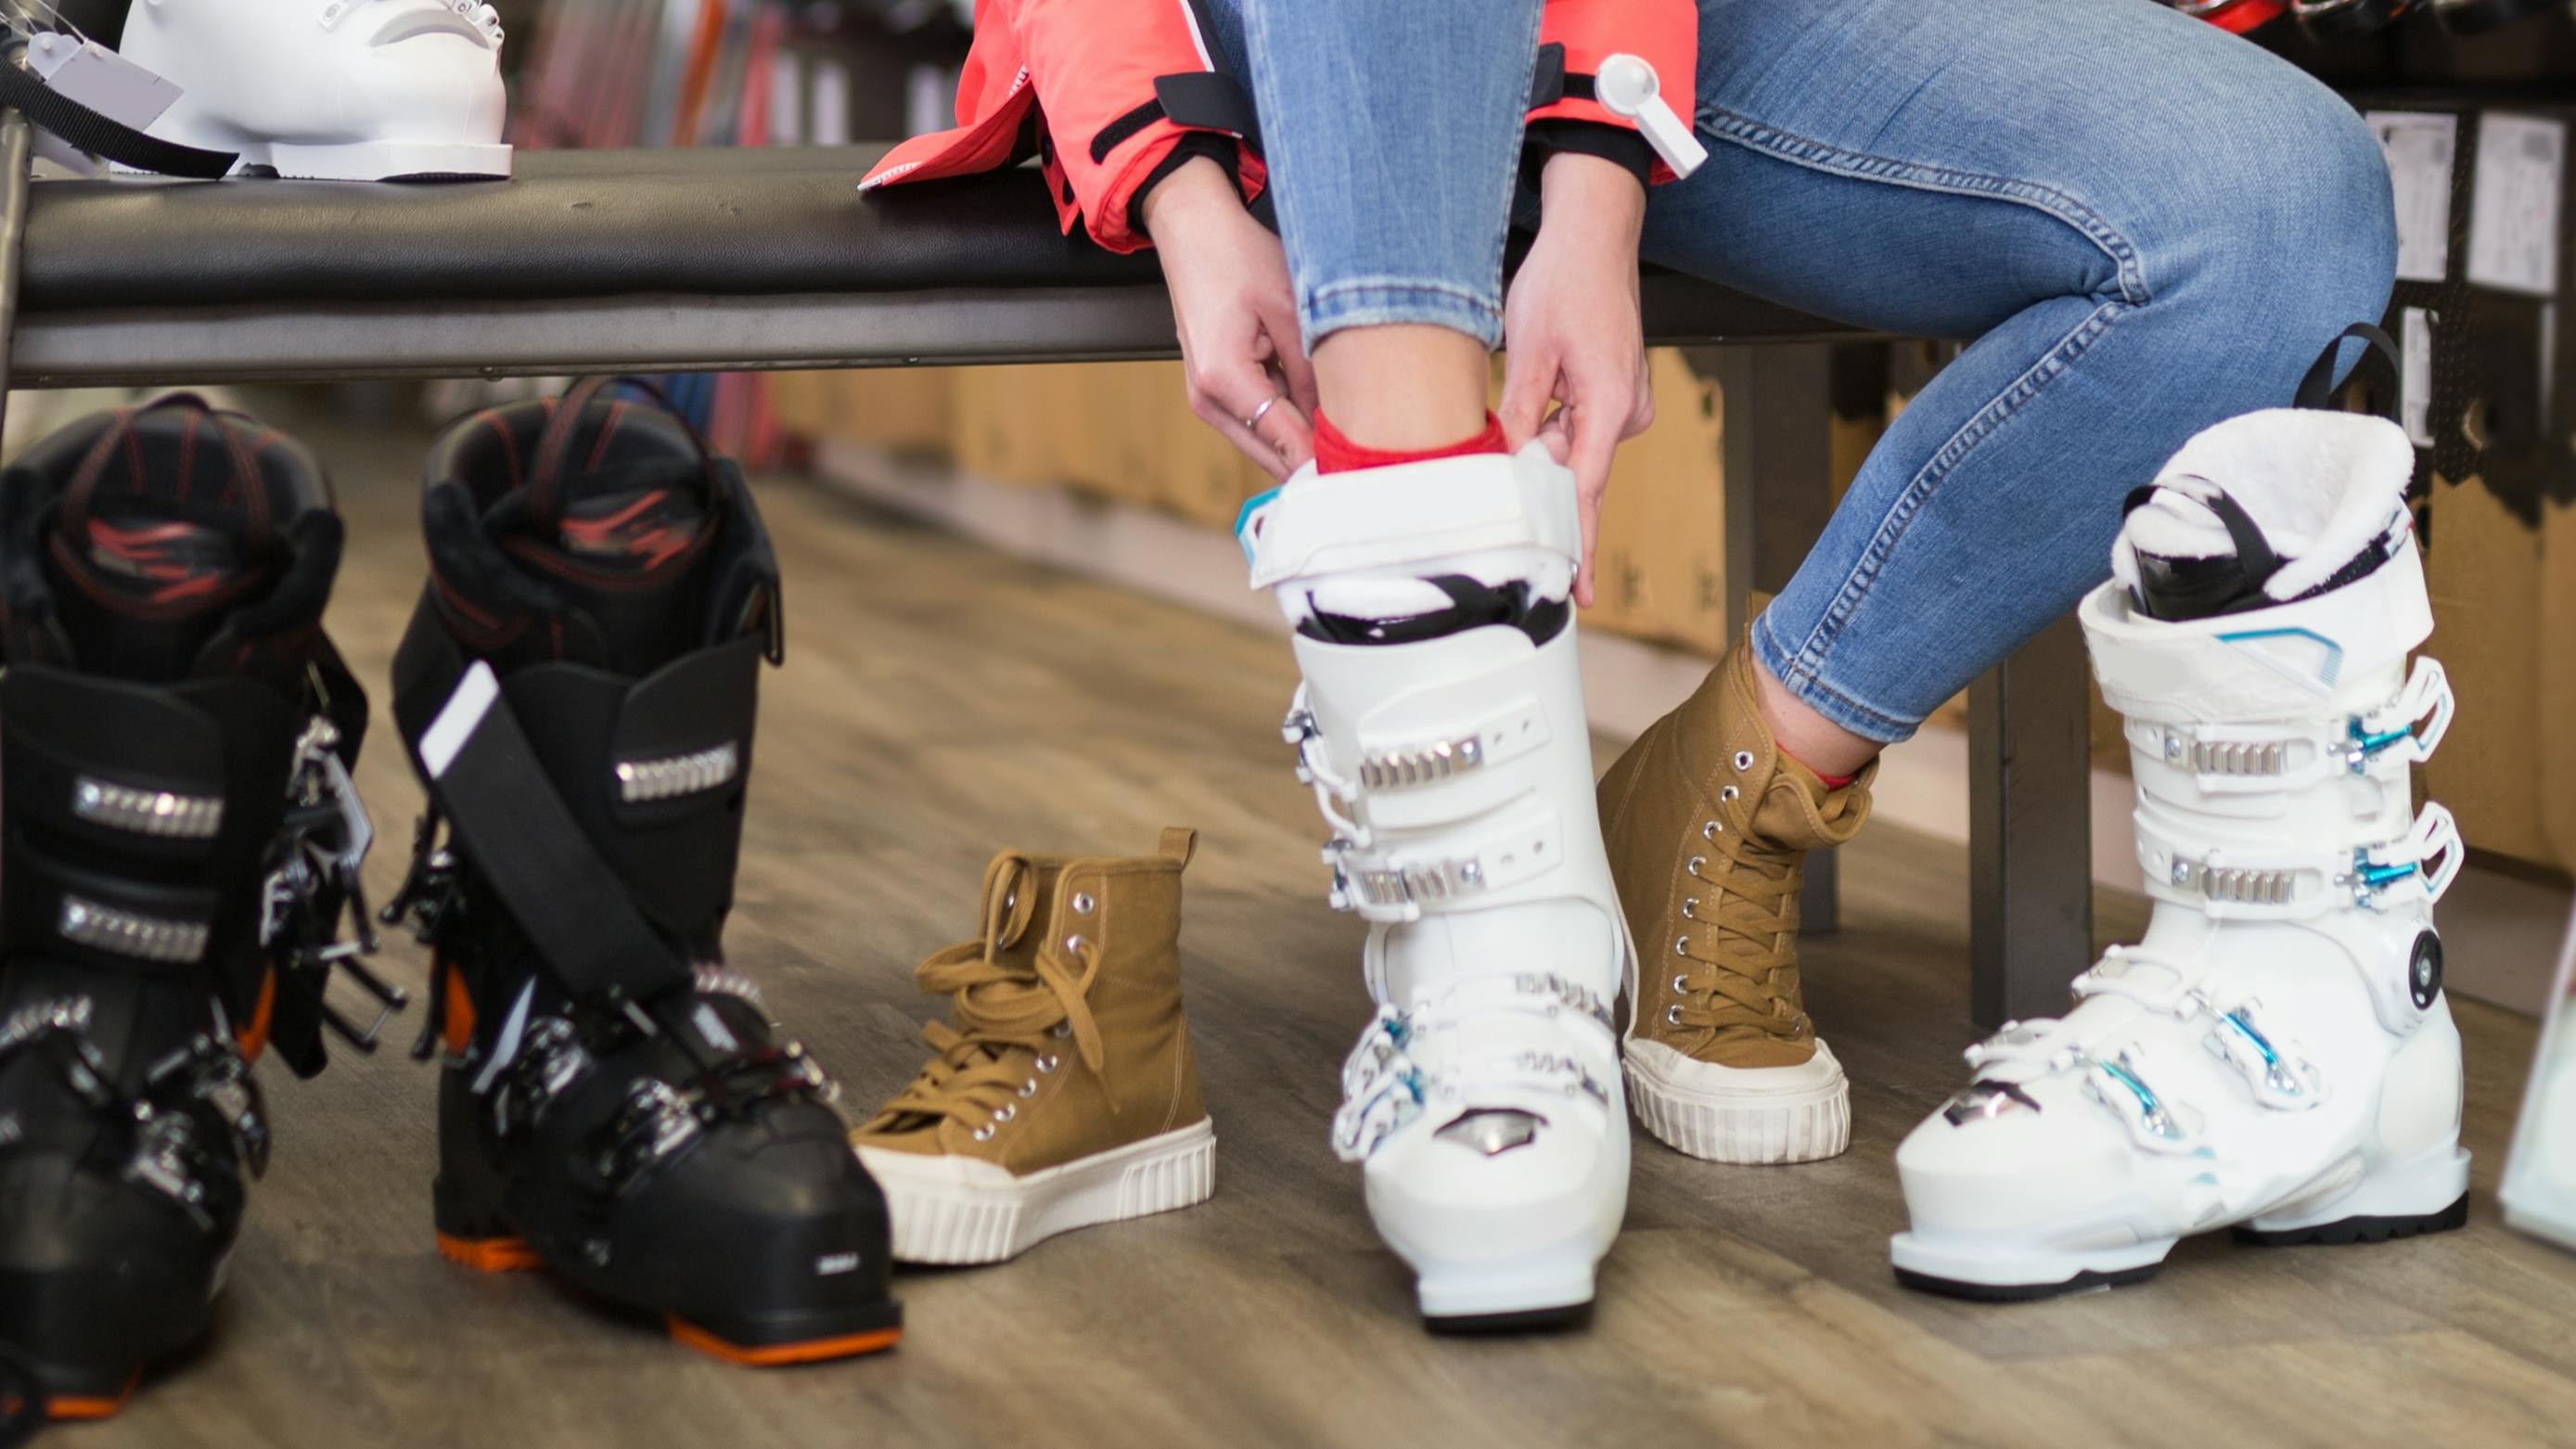 A woman tries on several pairs of ski boots in a store.